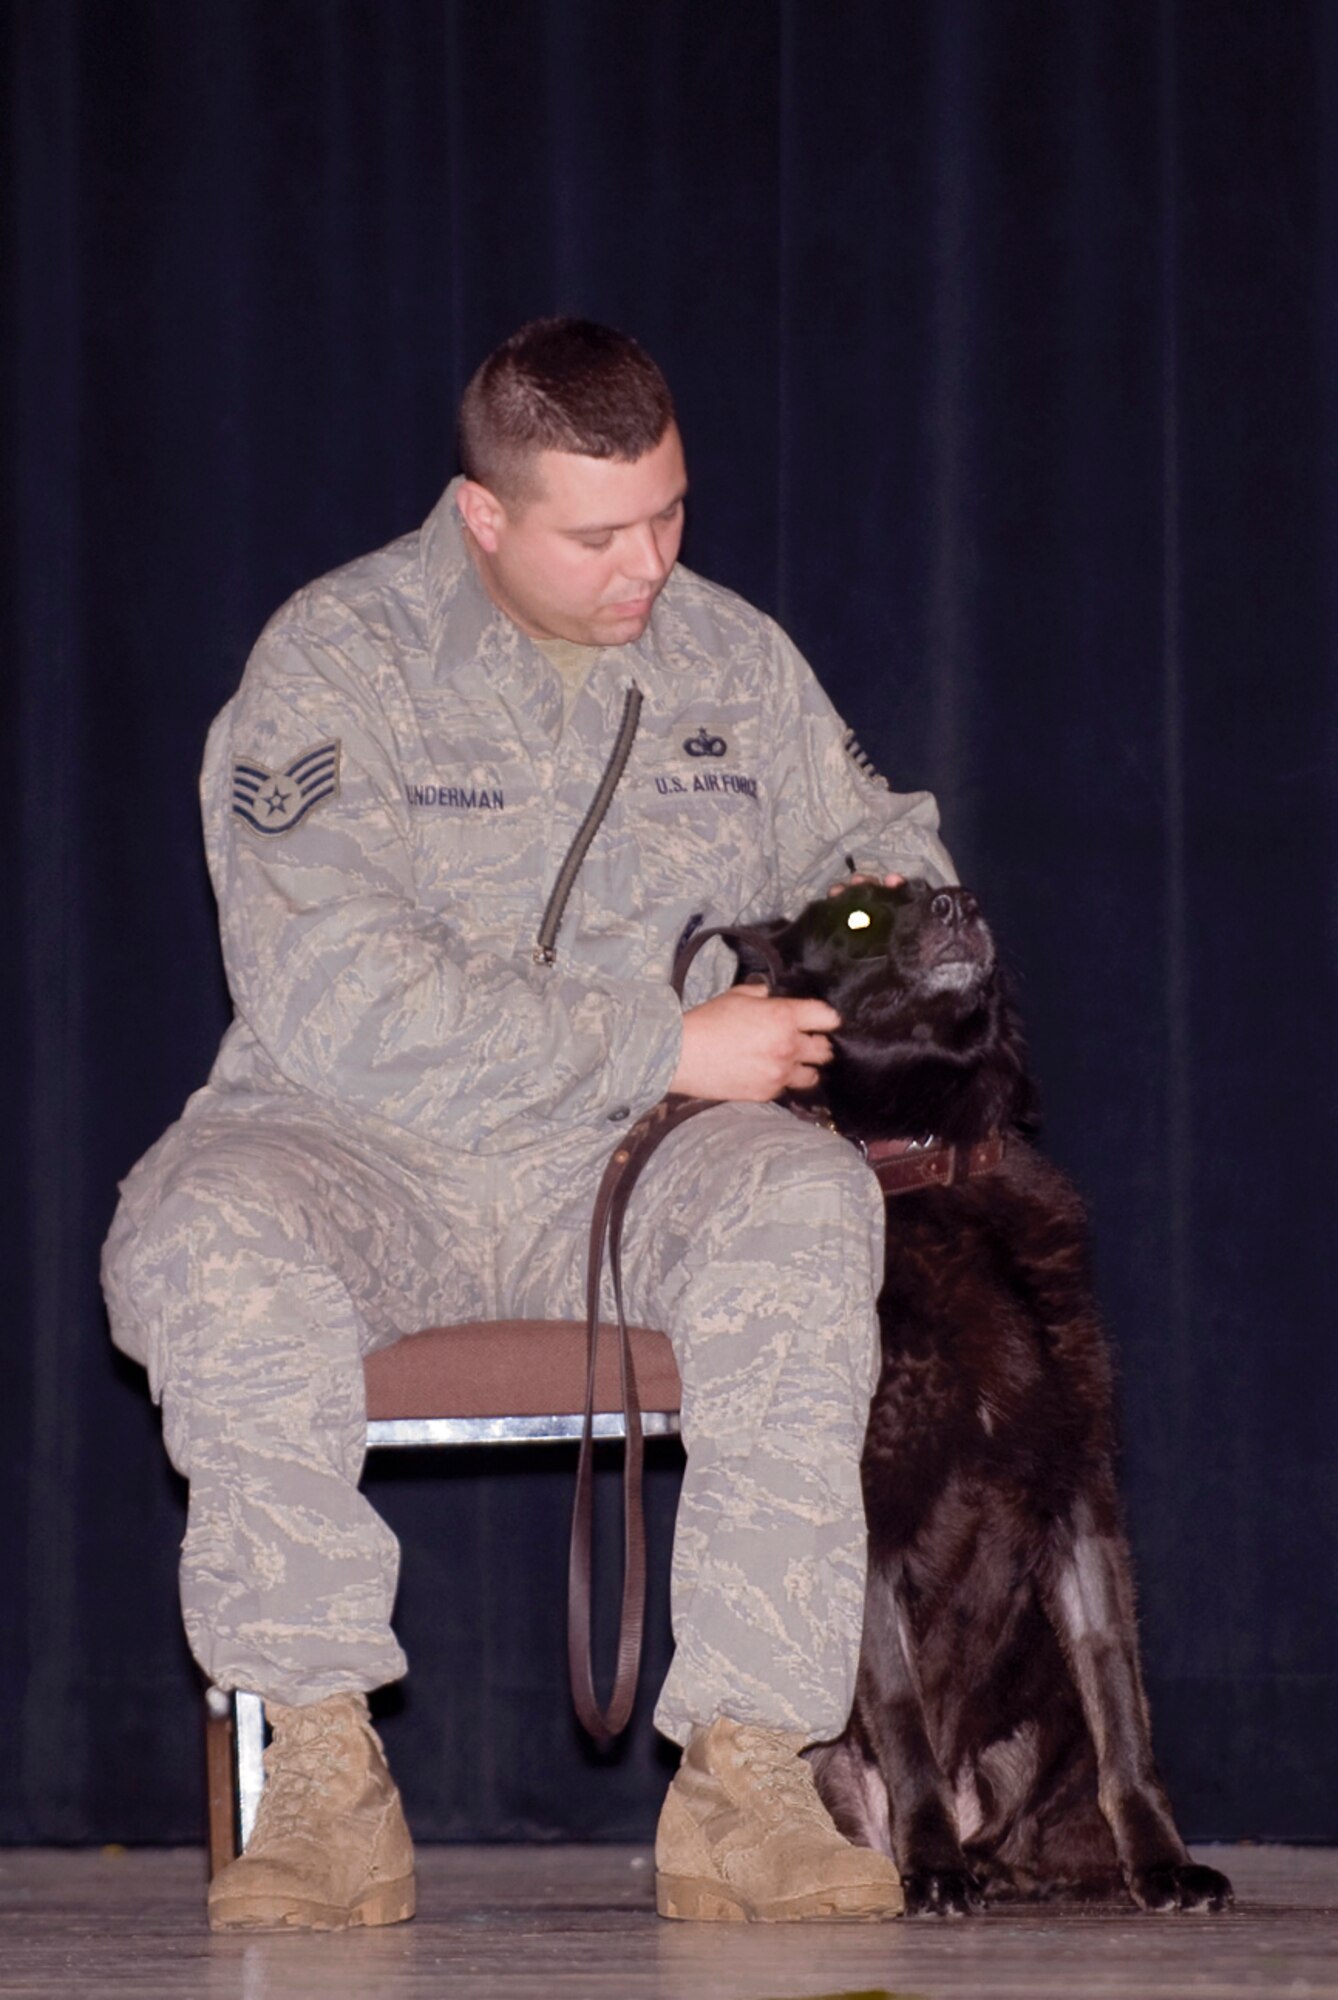 ELMENDORF AIR FORCE BASE, Alaska ? Military working dog Arko sits next to his handler Staff Sgt. Christopher Gunderman 3rd Security Forces Squadron during his retirement ceremony on July 7, 2008. Arko has served 11 years in the Air Force and been deployed 5 times to the Middle East. (U.S. Air Force photo by Senior Airmen Jonathan Steffen)